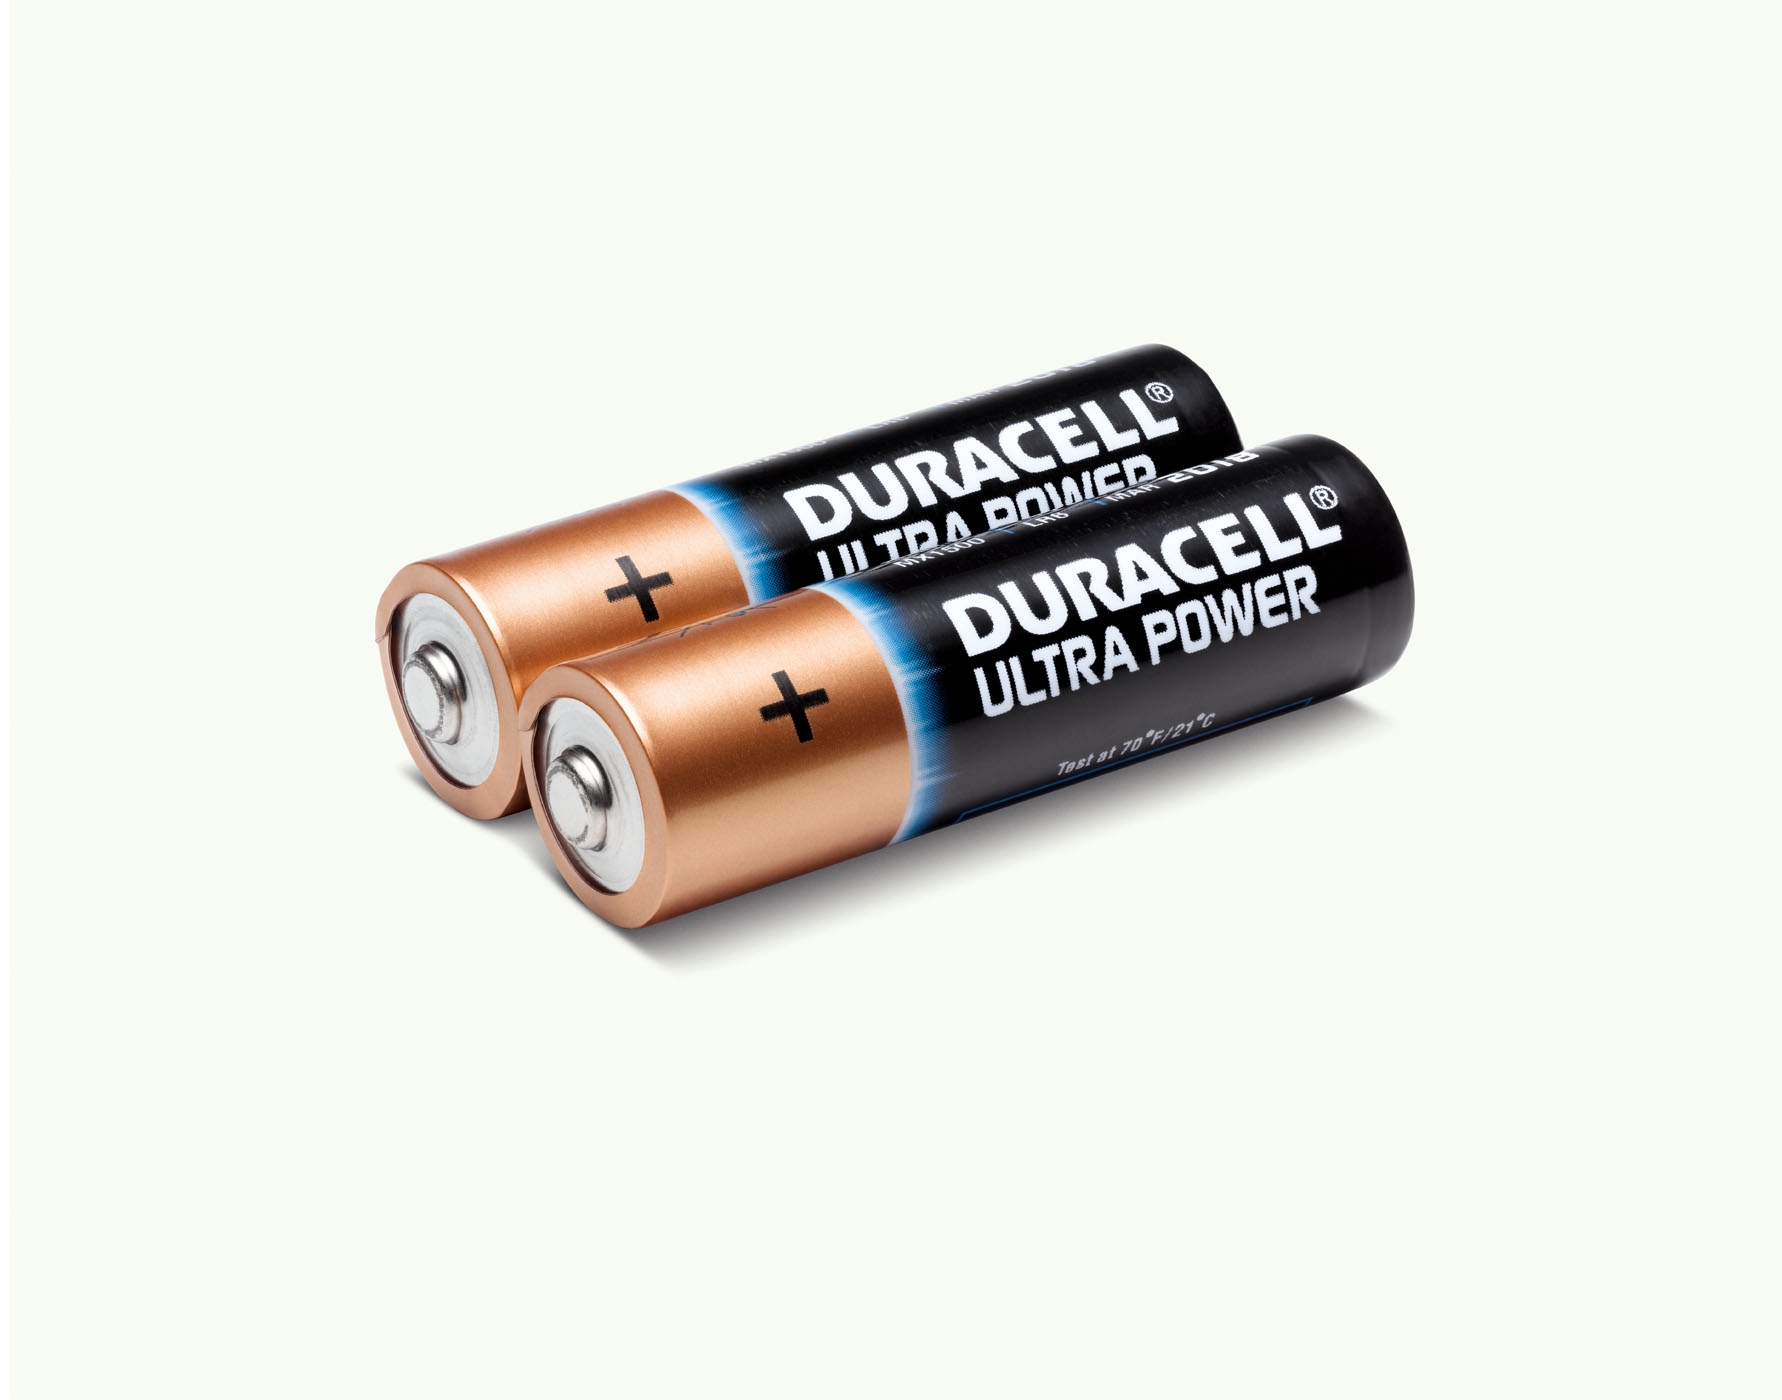 Duracell batteries by Alexander Kent London based still life and product photographer.